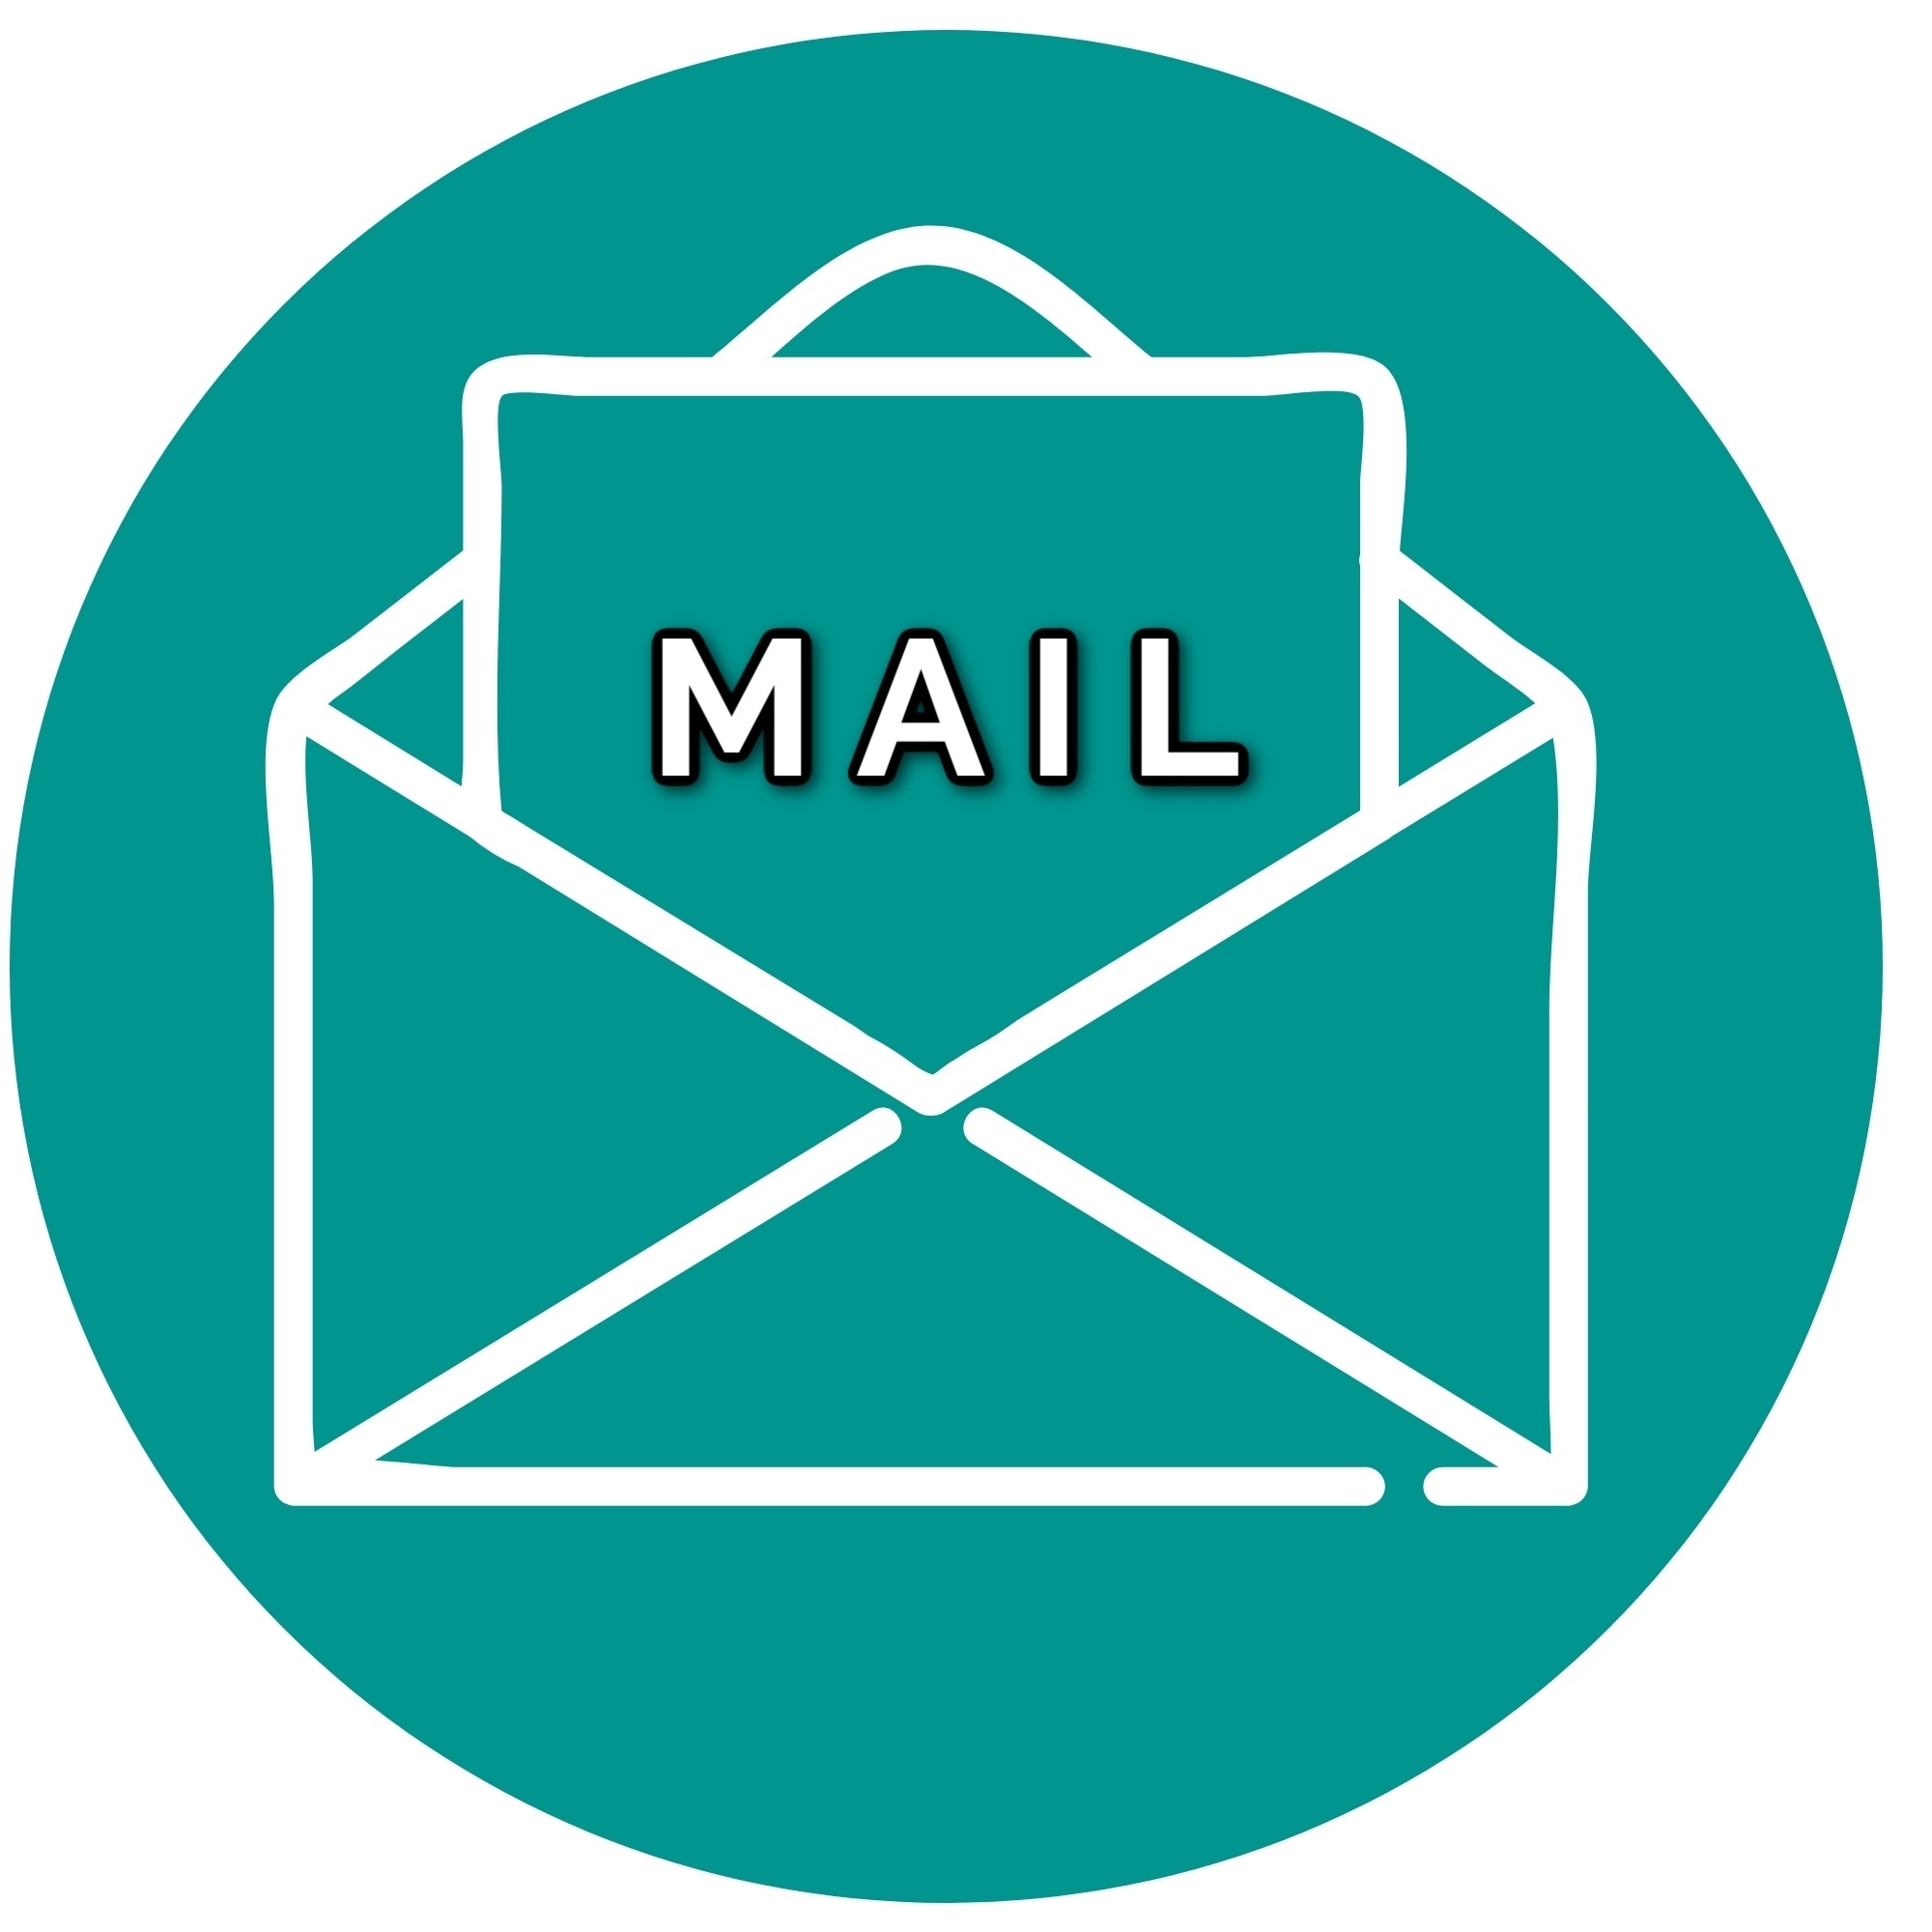 envelope graphic on teal circle with black and white lettering